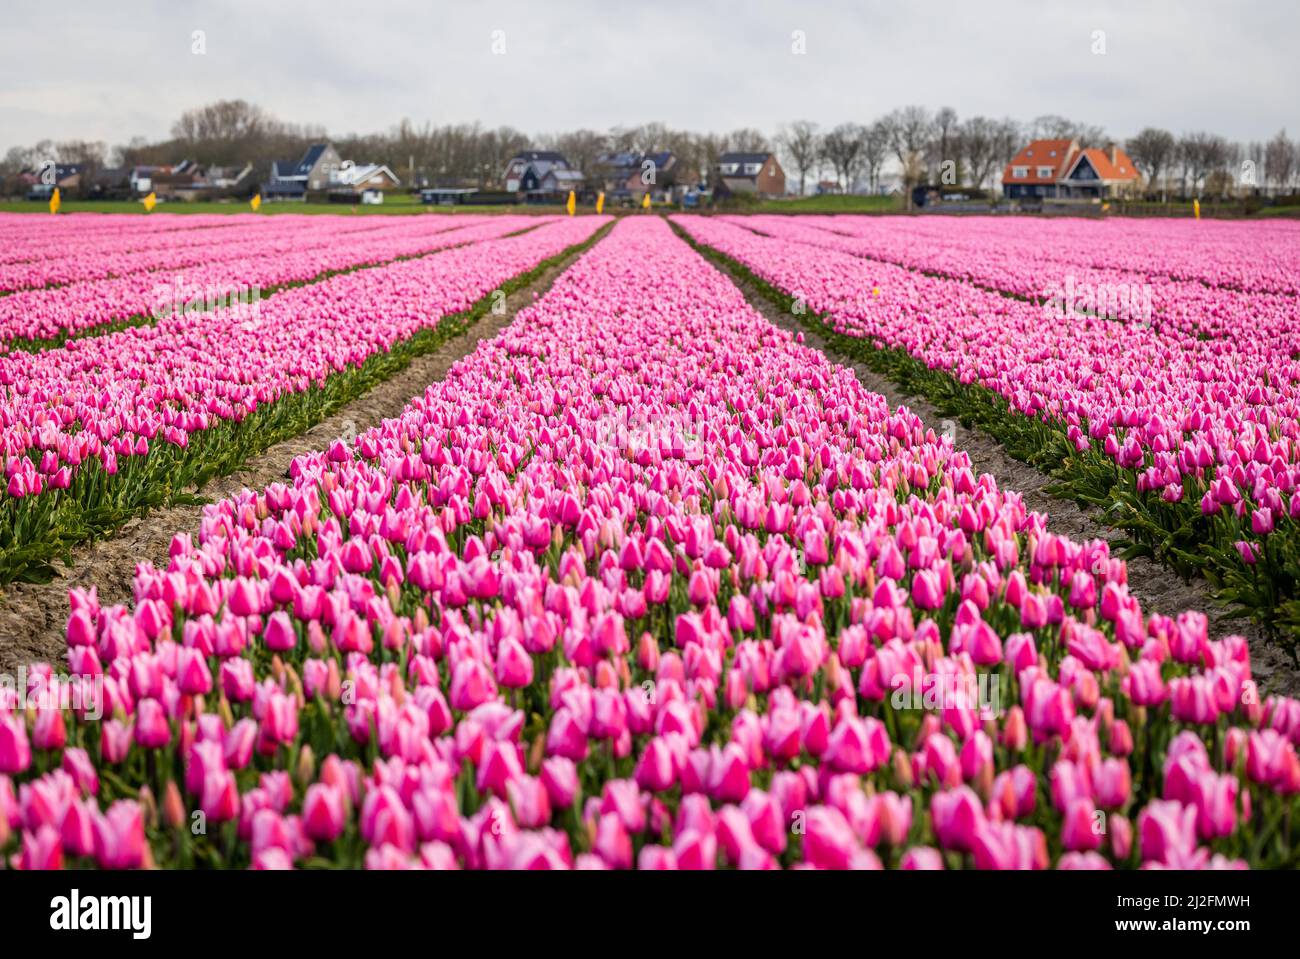 2022-03-31 08:10:33 31-03-2022, Zuid-Beijerland - Tulip fields in bloom on a field in Zuid-Beijerland. The tulips bloom early this year due to the beautiful sunny weather. Photo: ANP / Hollandse Hoogte / Jeffrey Groeneweg netherlands out - belgium out Stock Photo